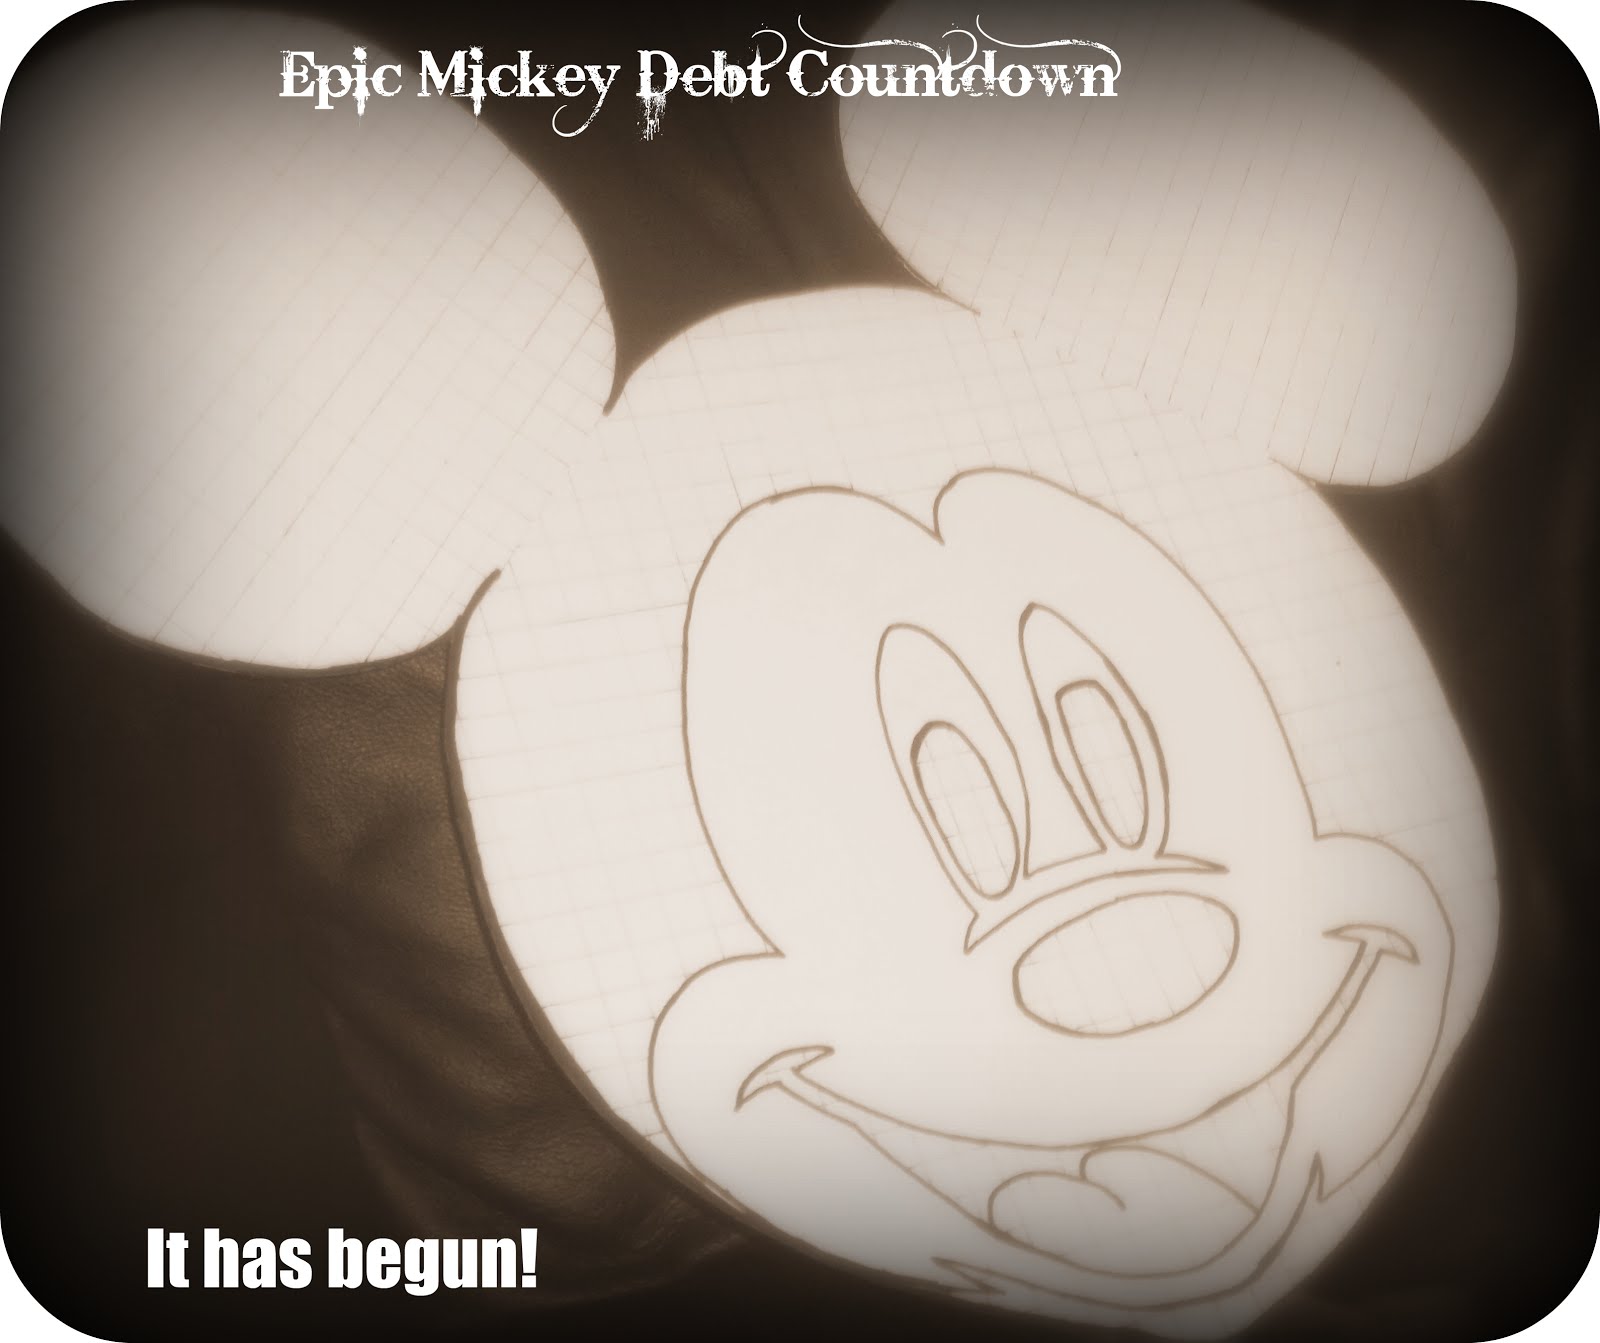 Epic Mickey Debt Count Down